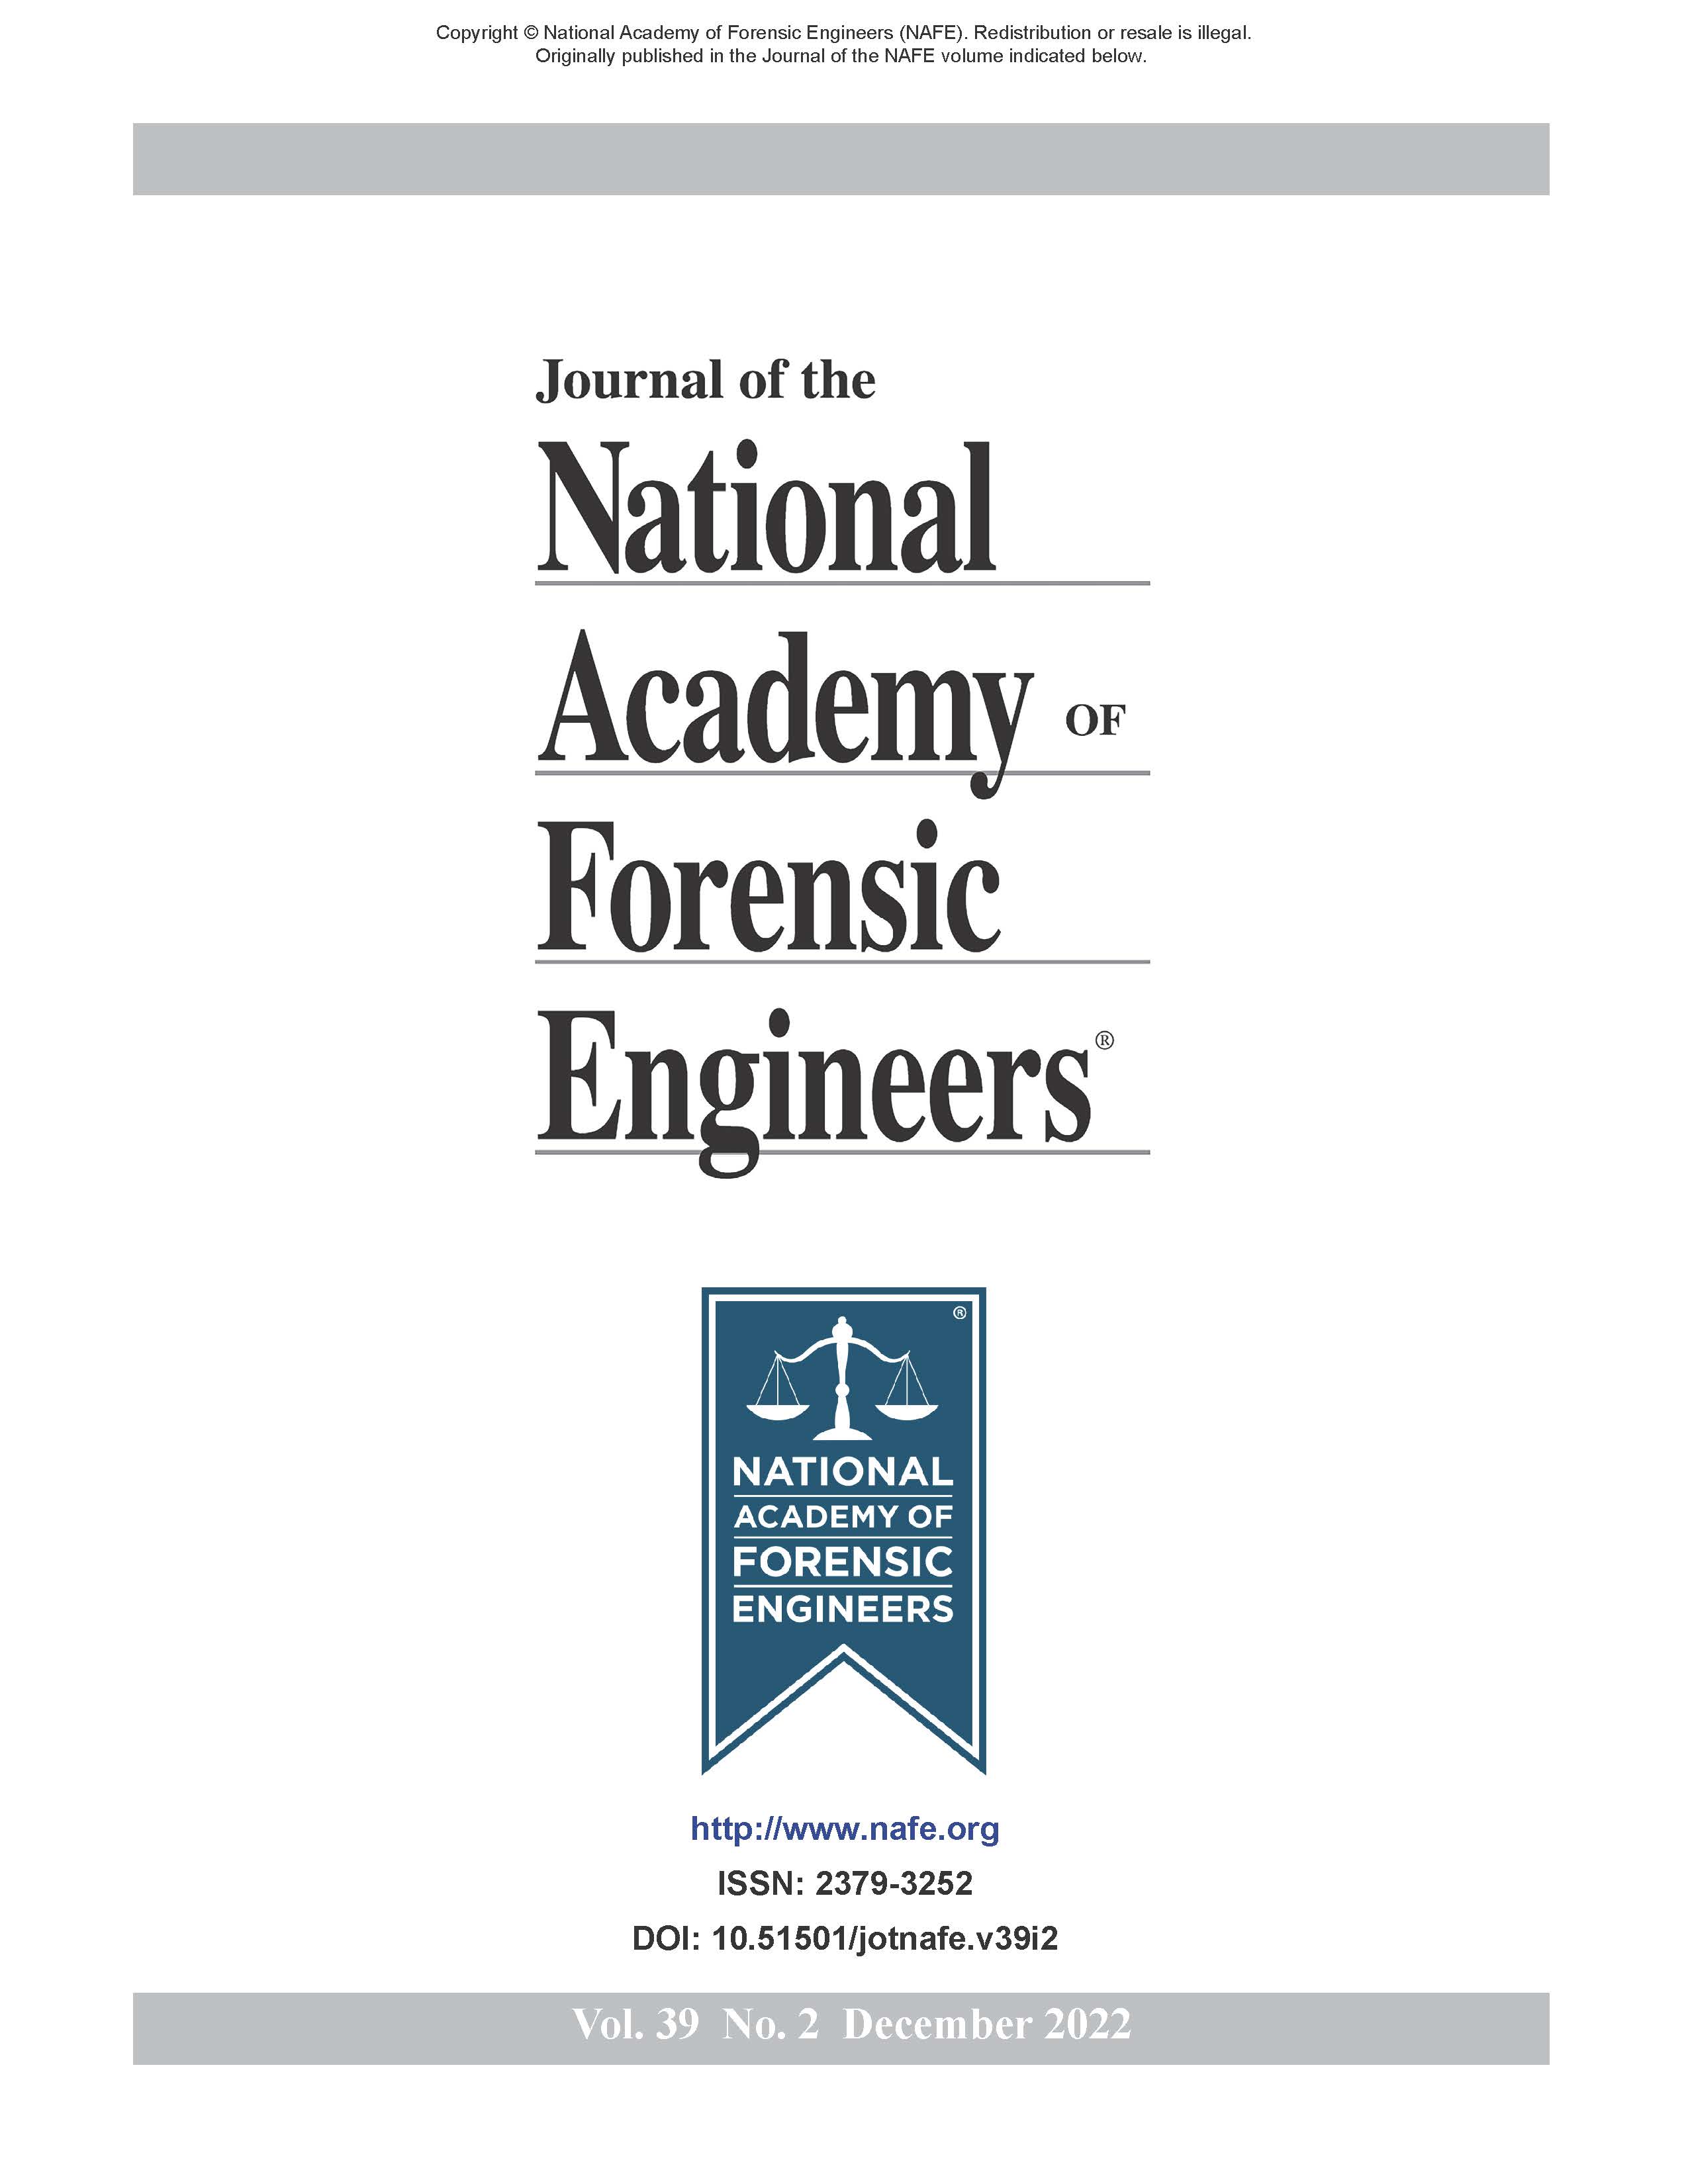 					View Vol. 39 No. 2 (2022): Journal of the National Academy of Forensic Engineers
				